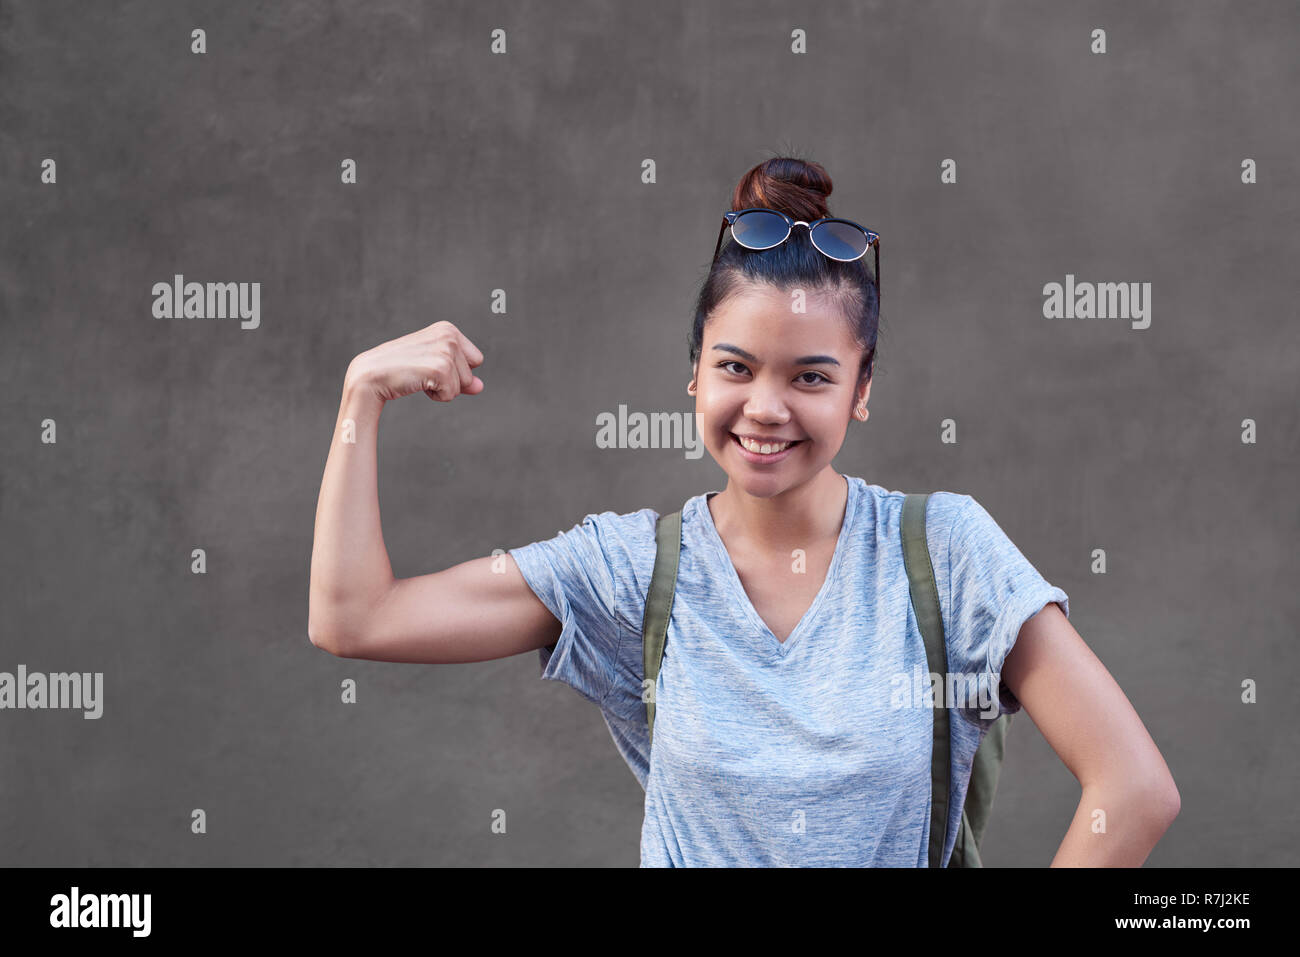 Joyful Asian woman smiling while flexing her bicep outside Stock Photo